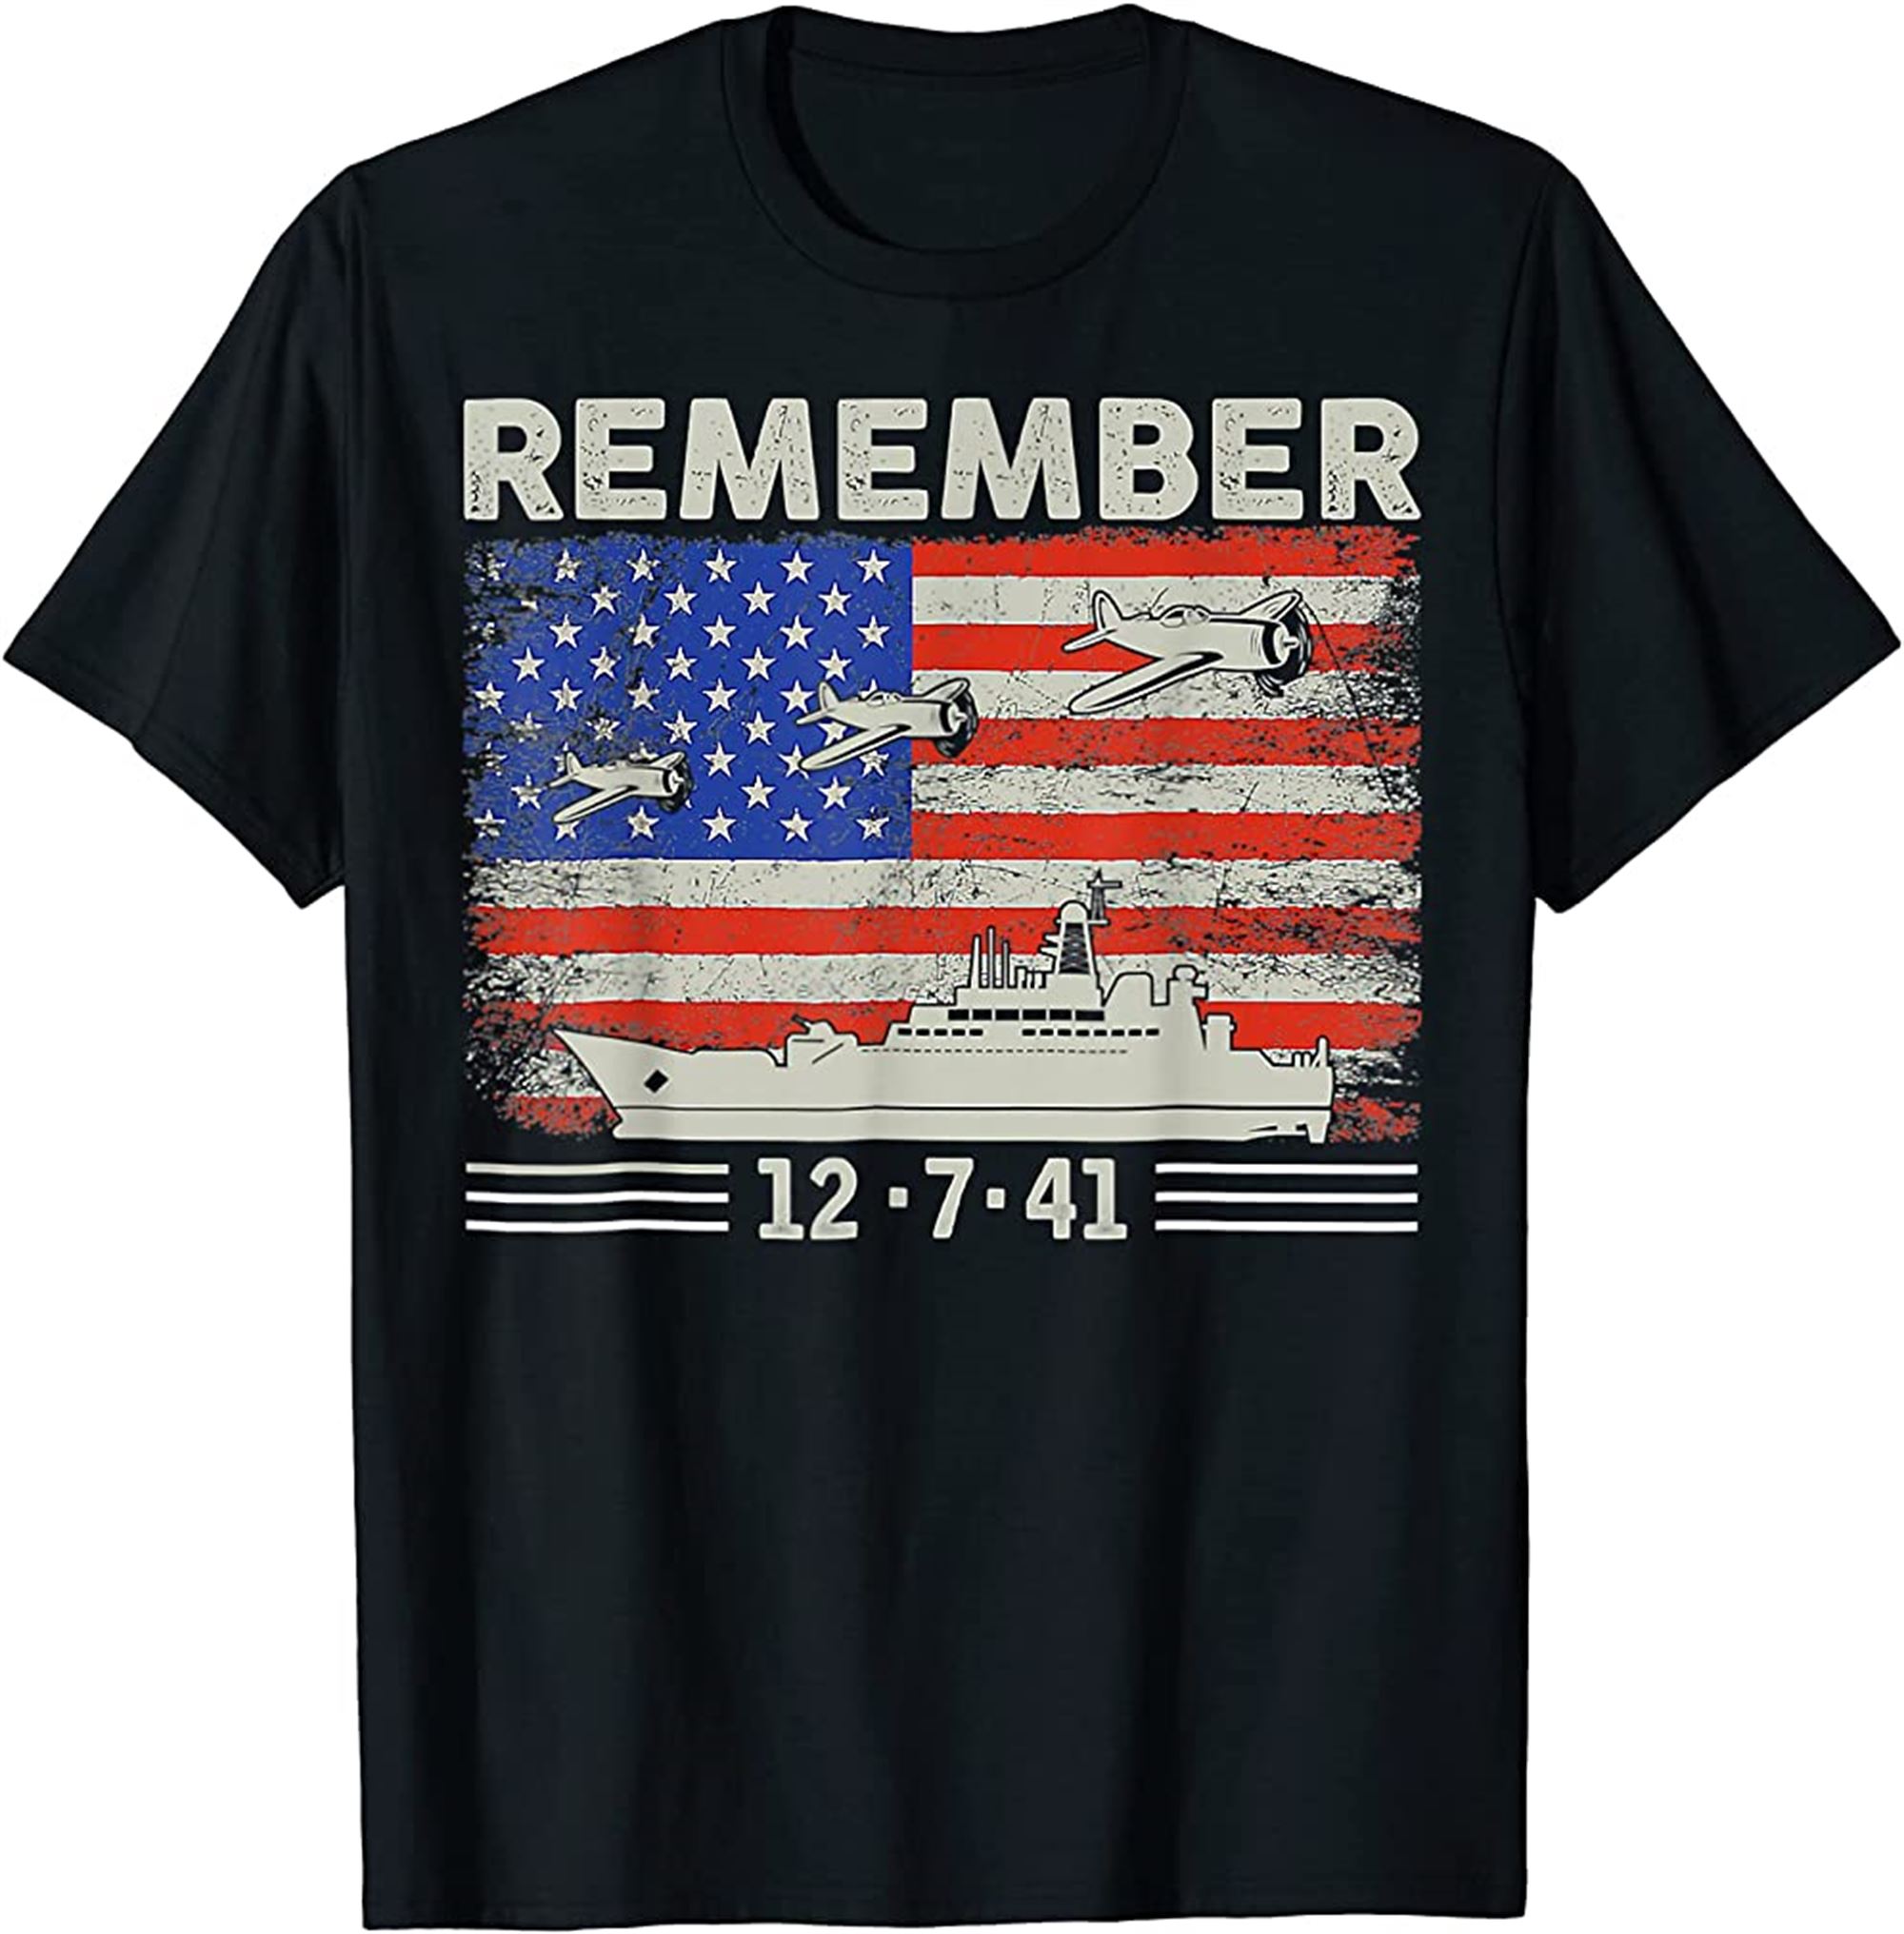 Wwii Remember Pearl Harbor Memorial Day December 7th 1941 T-shirt Size Up To 5xl